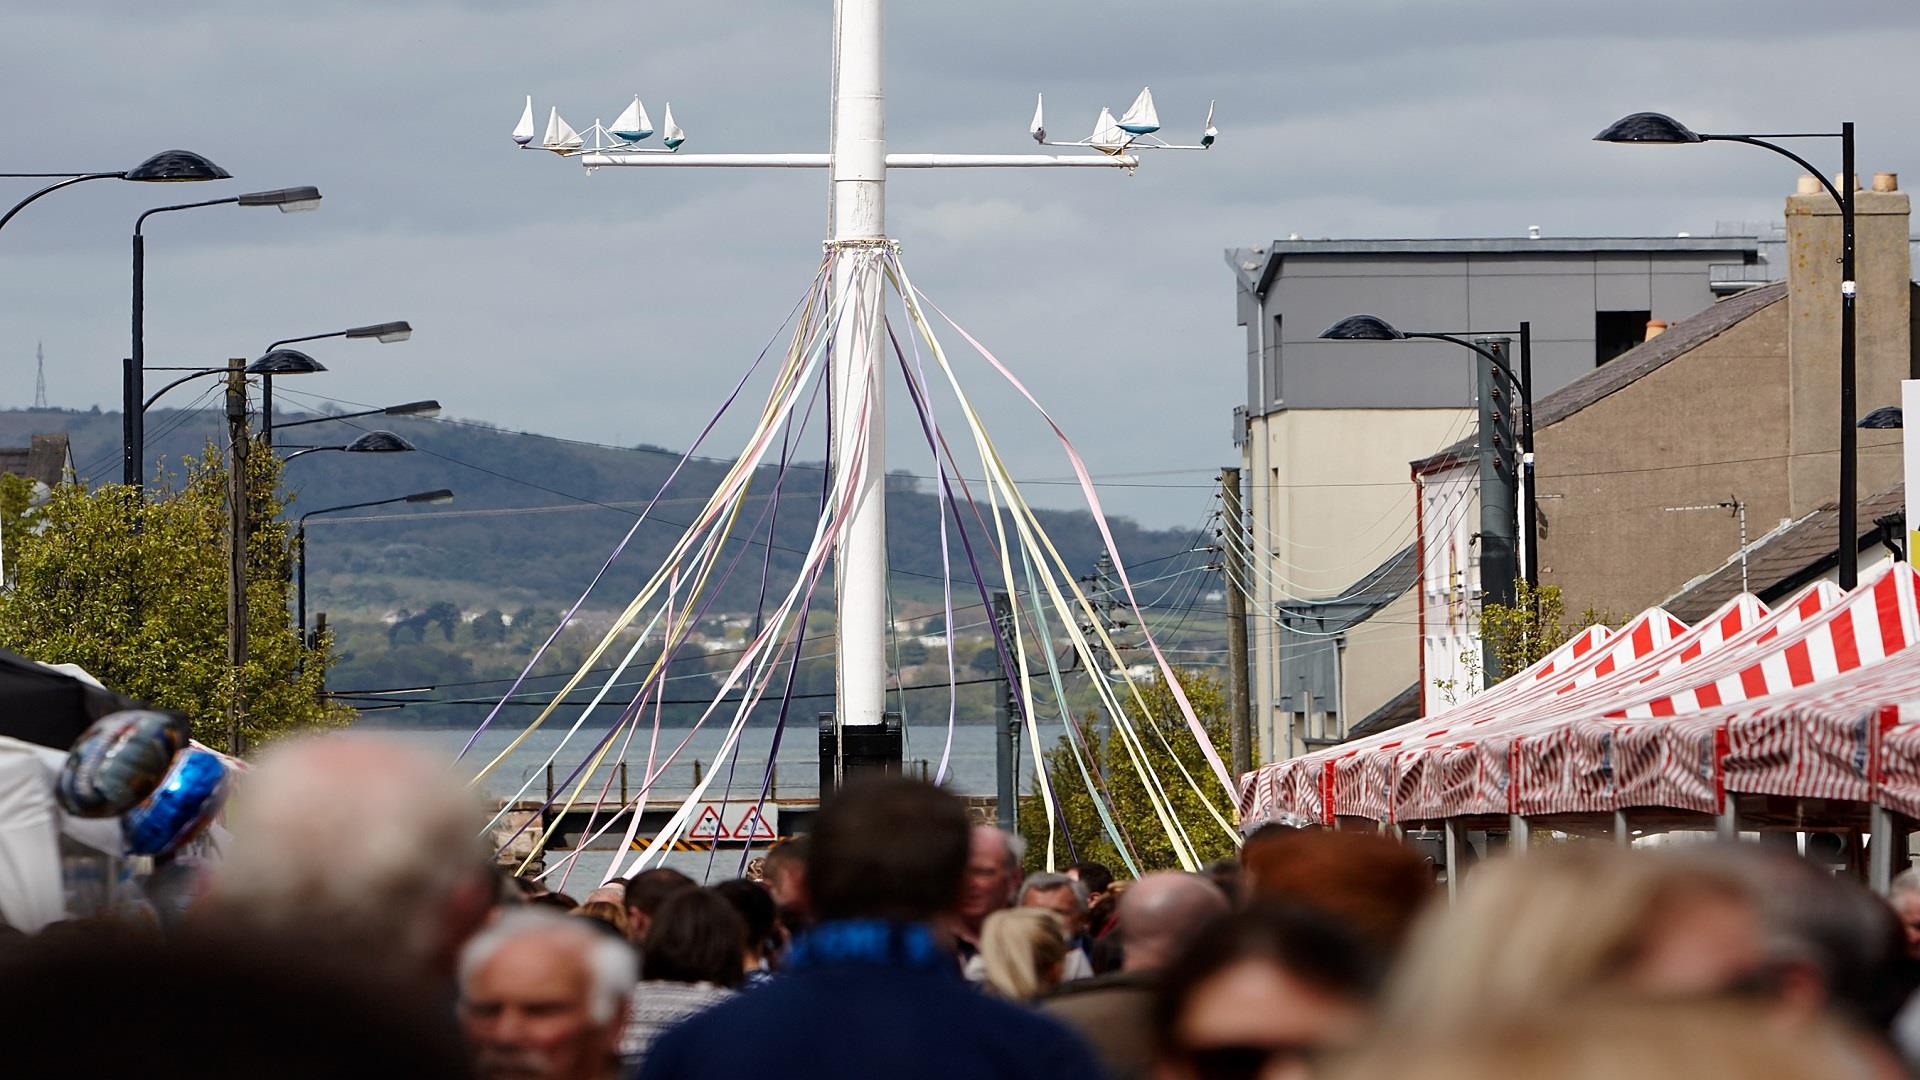 Image of Holywood Maypole dressed with ribbons for the annual May Day dancing event